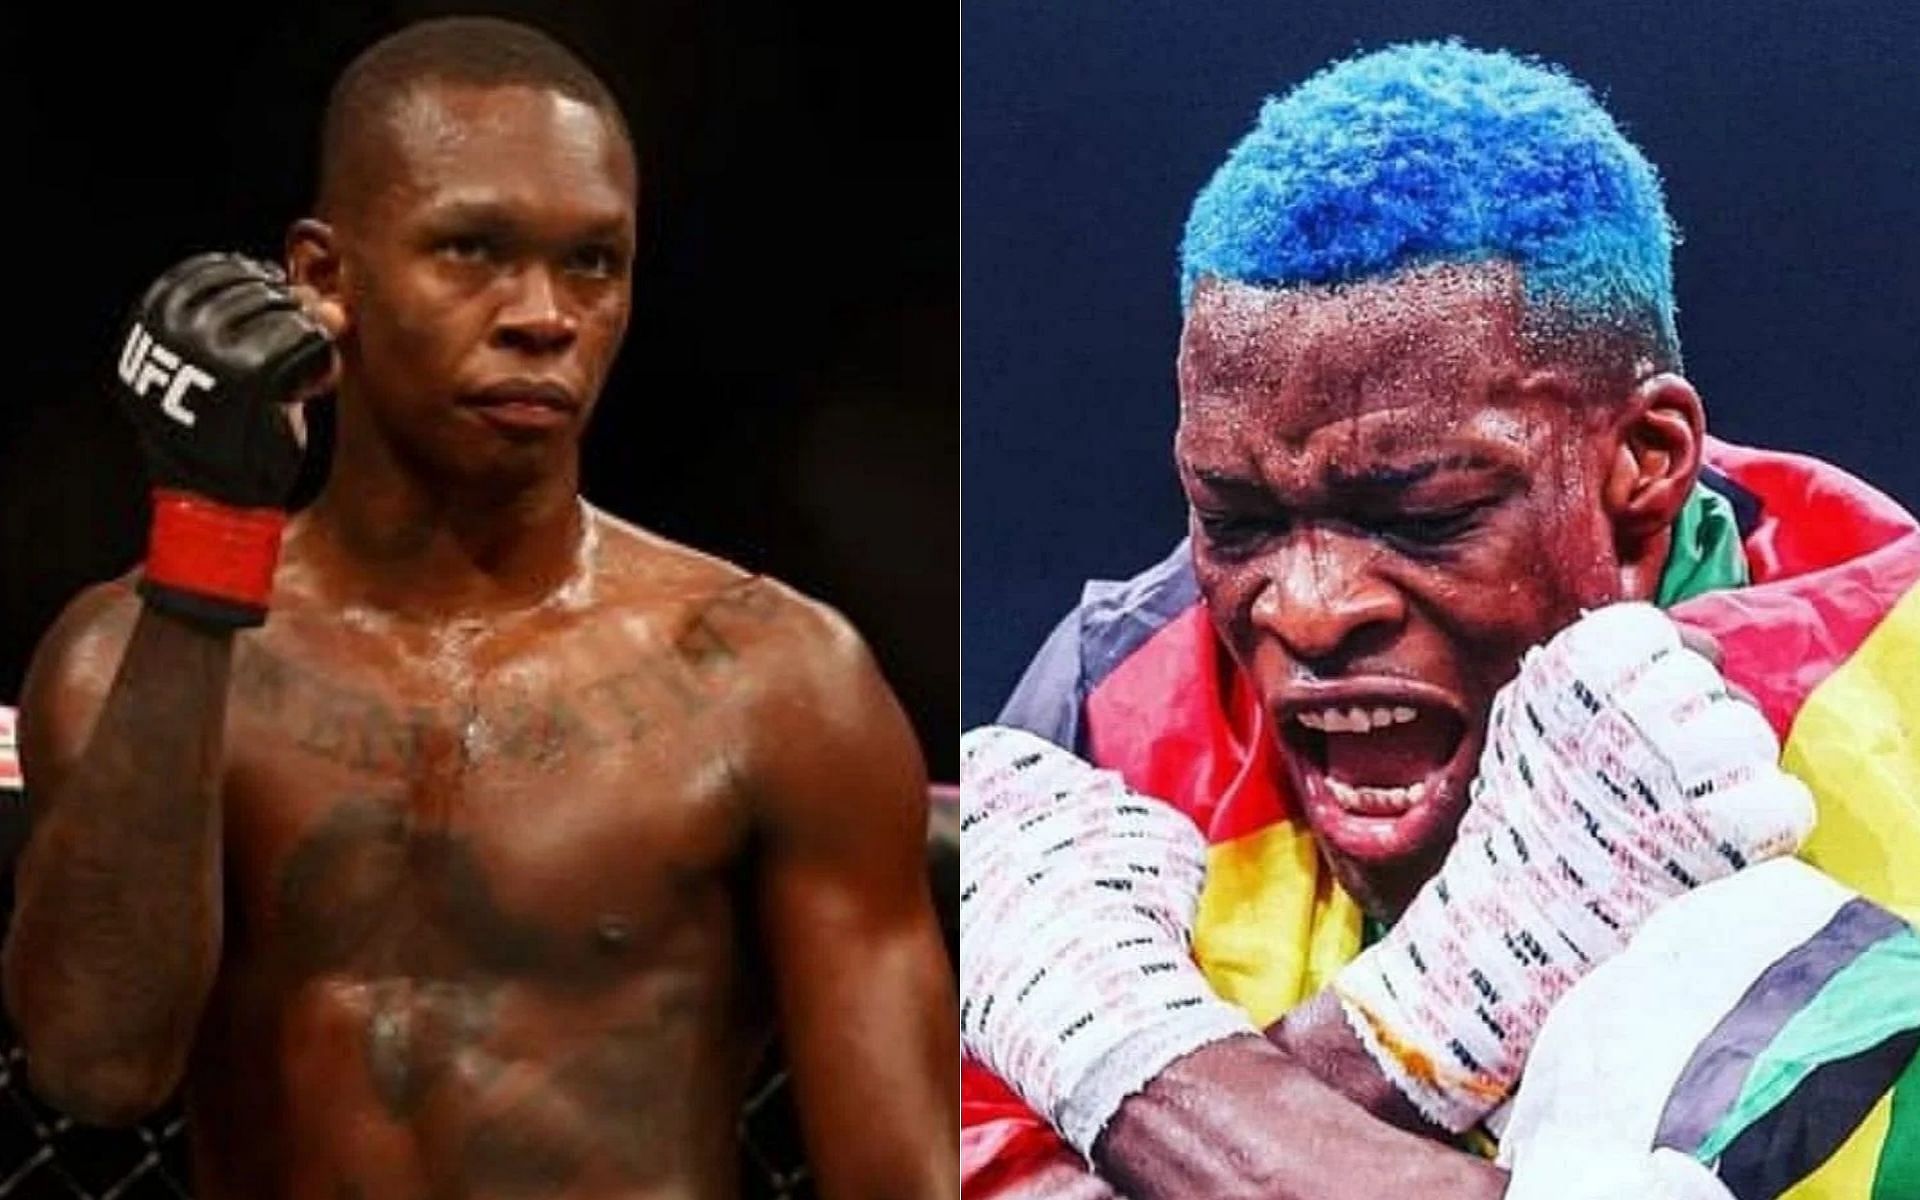 Israel Adesanya (left) and Mike Mathetha (right) [Image credits: @blood_diam0nd on Instagram]